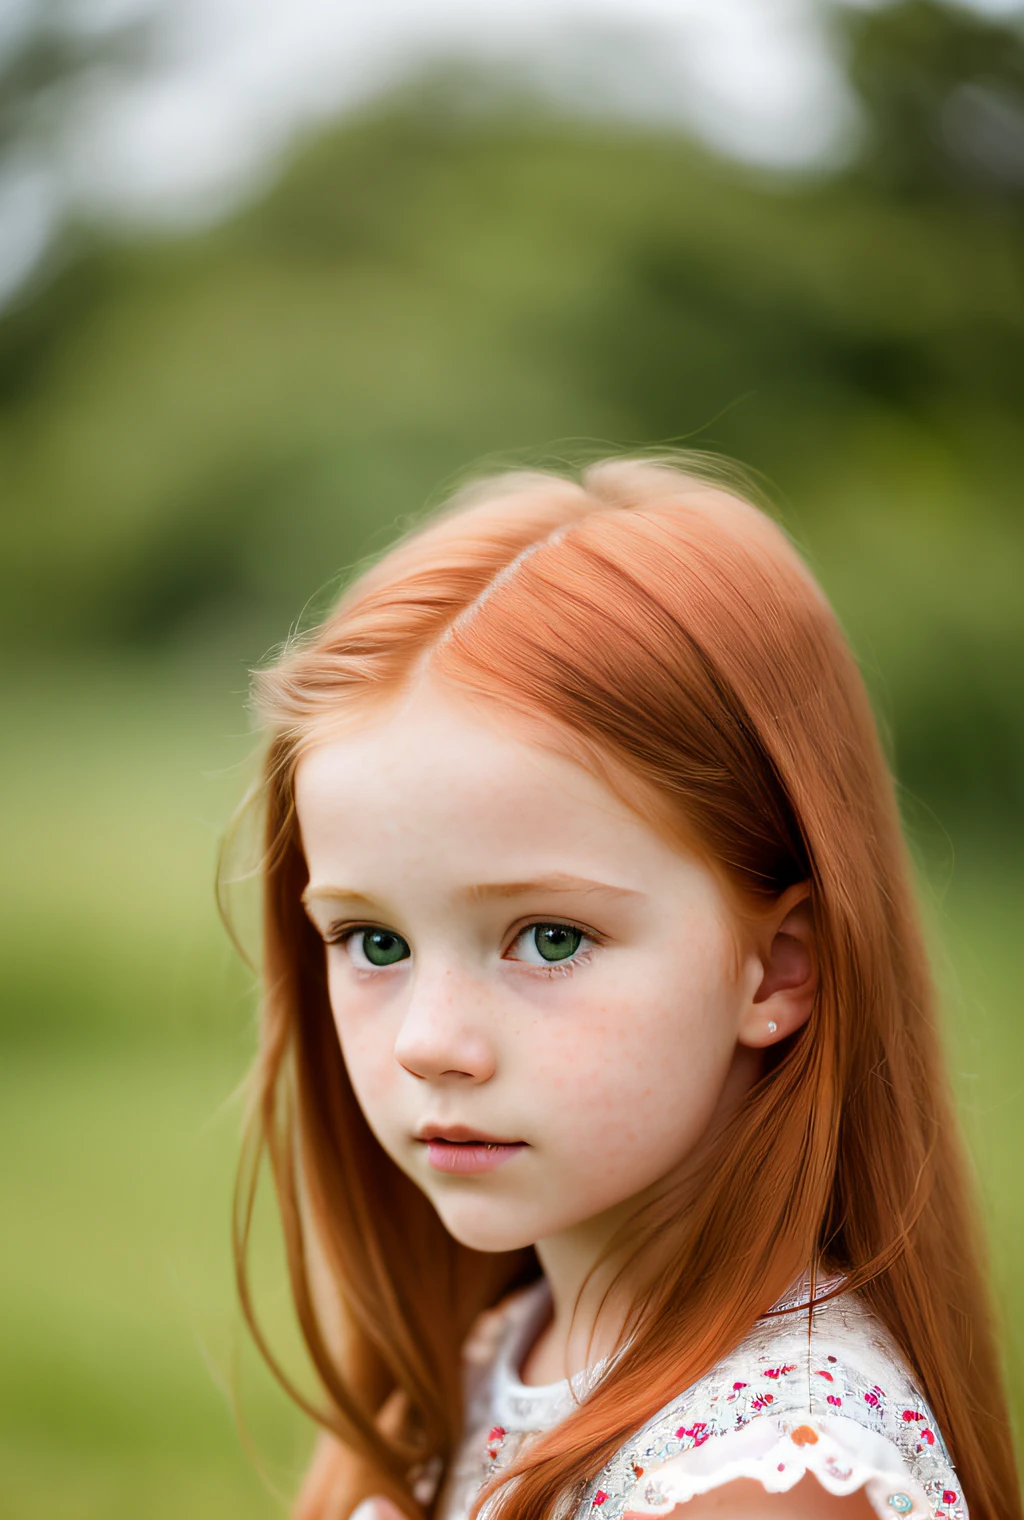 HD photo, best quality, hyperrealistic, cinematic photo, innocent 20yo feminin of a  is extraordinarily beautiful with intense HARBOR red hair, close to insects such as butterflies and bees. (8k, epic composition, photorealistic, sharp focus), elaborate background, DSLR, intricate details, rule of thirds, inset biology